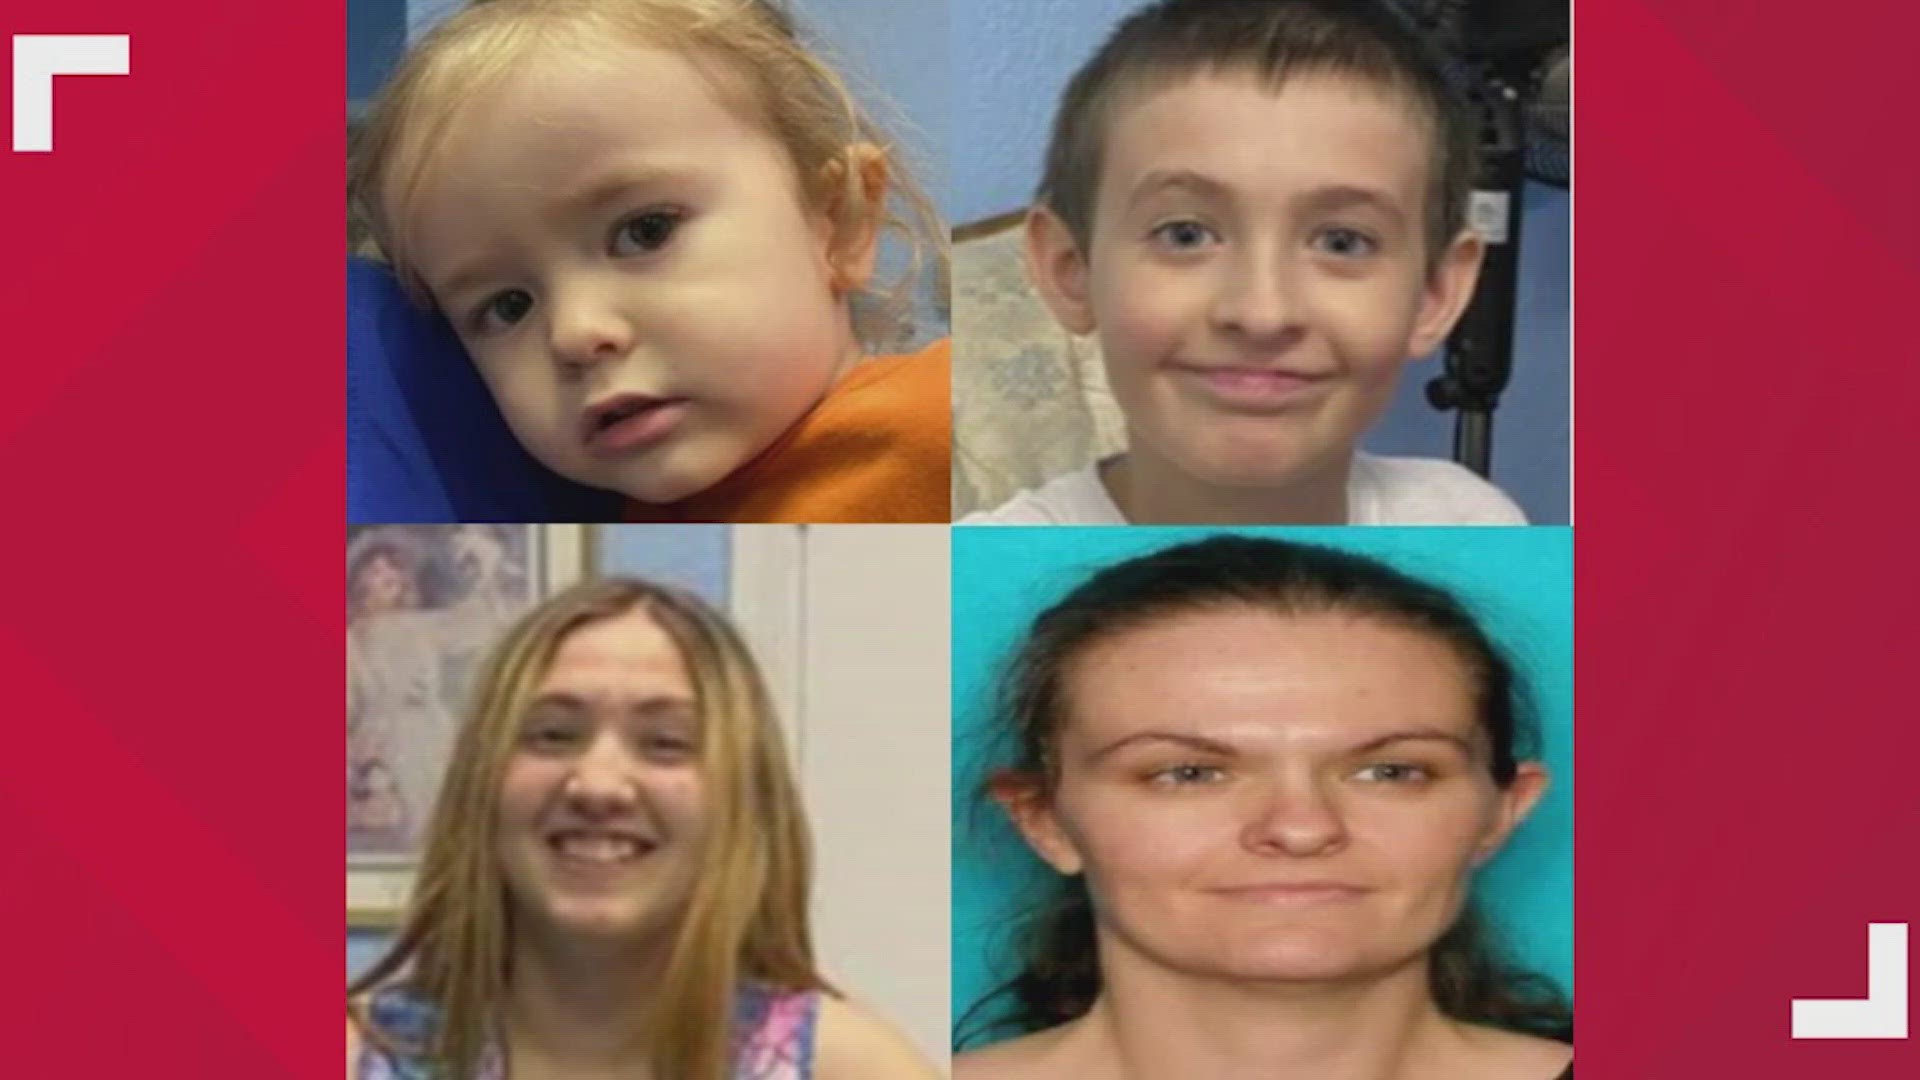 If you have any information on this AMBER Alert, please call the El Paso Police Department at 915-212-4040.